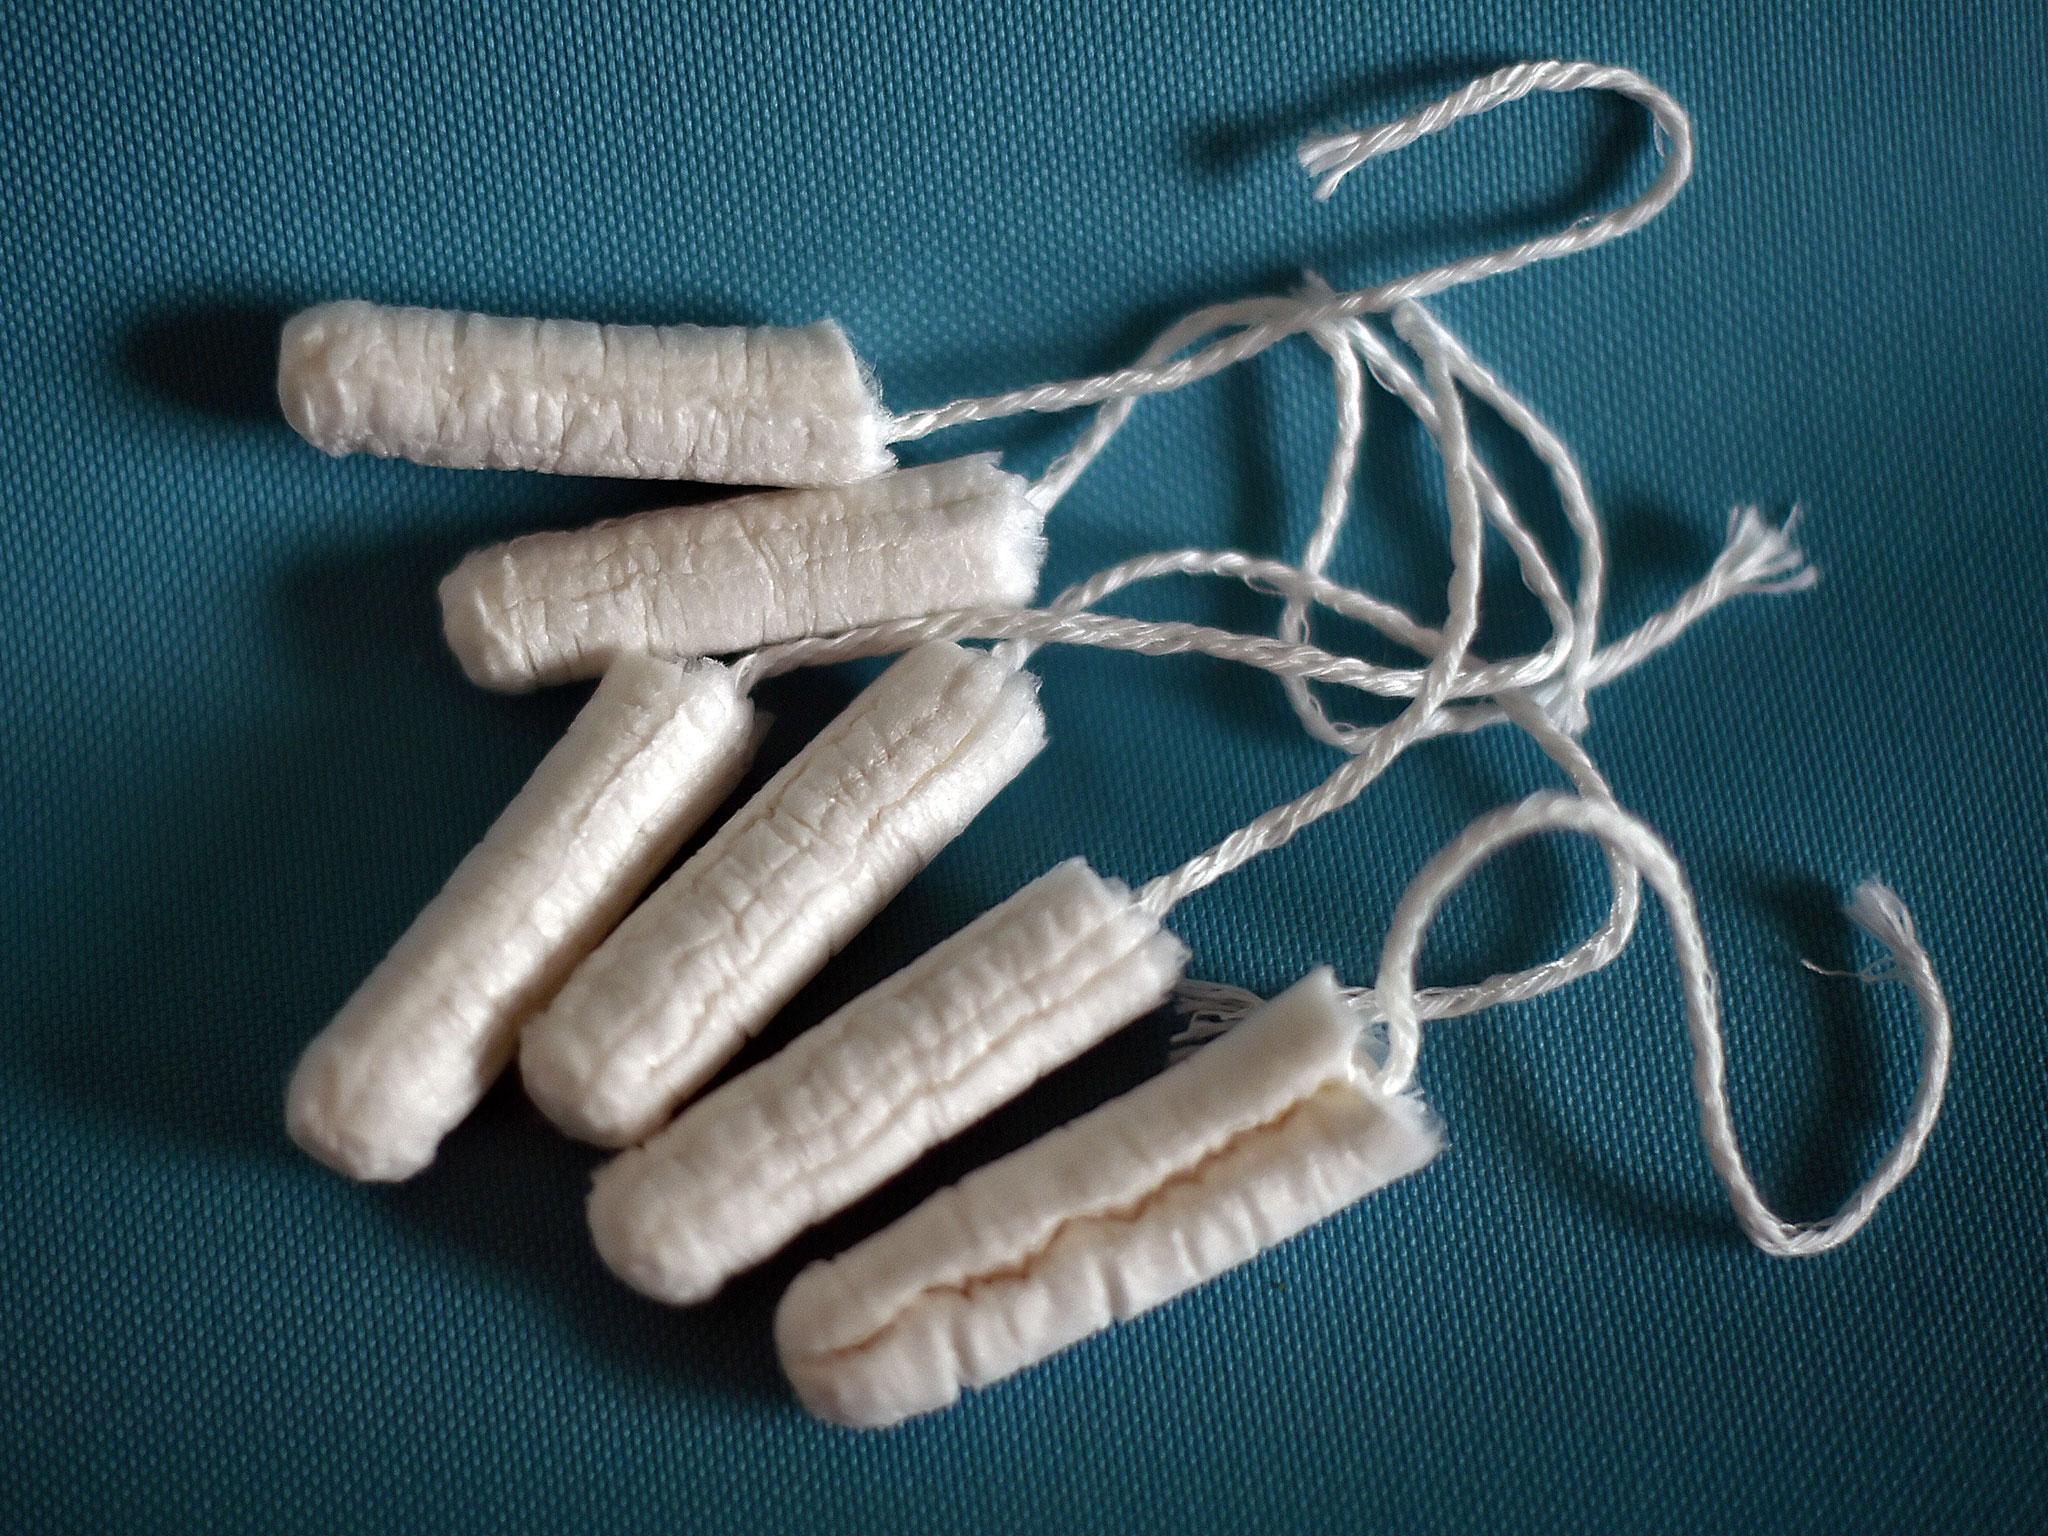 Campaigners say tampons are not a luxury product